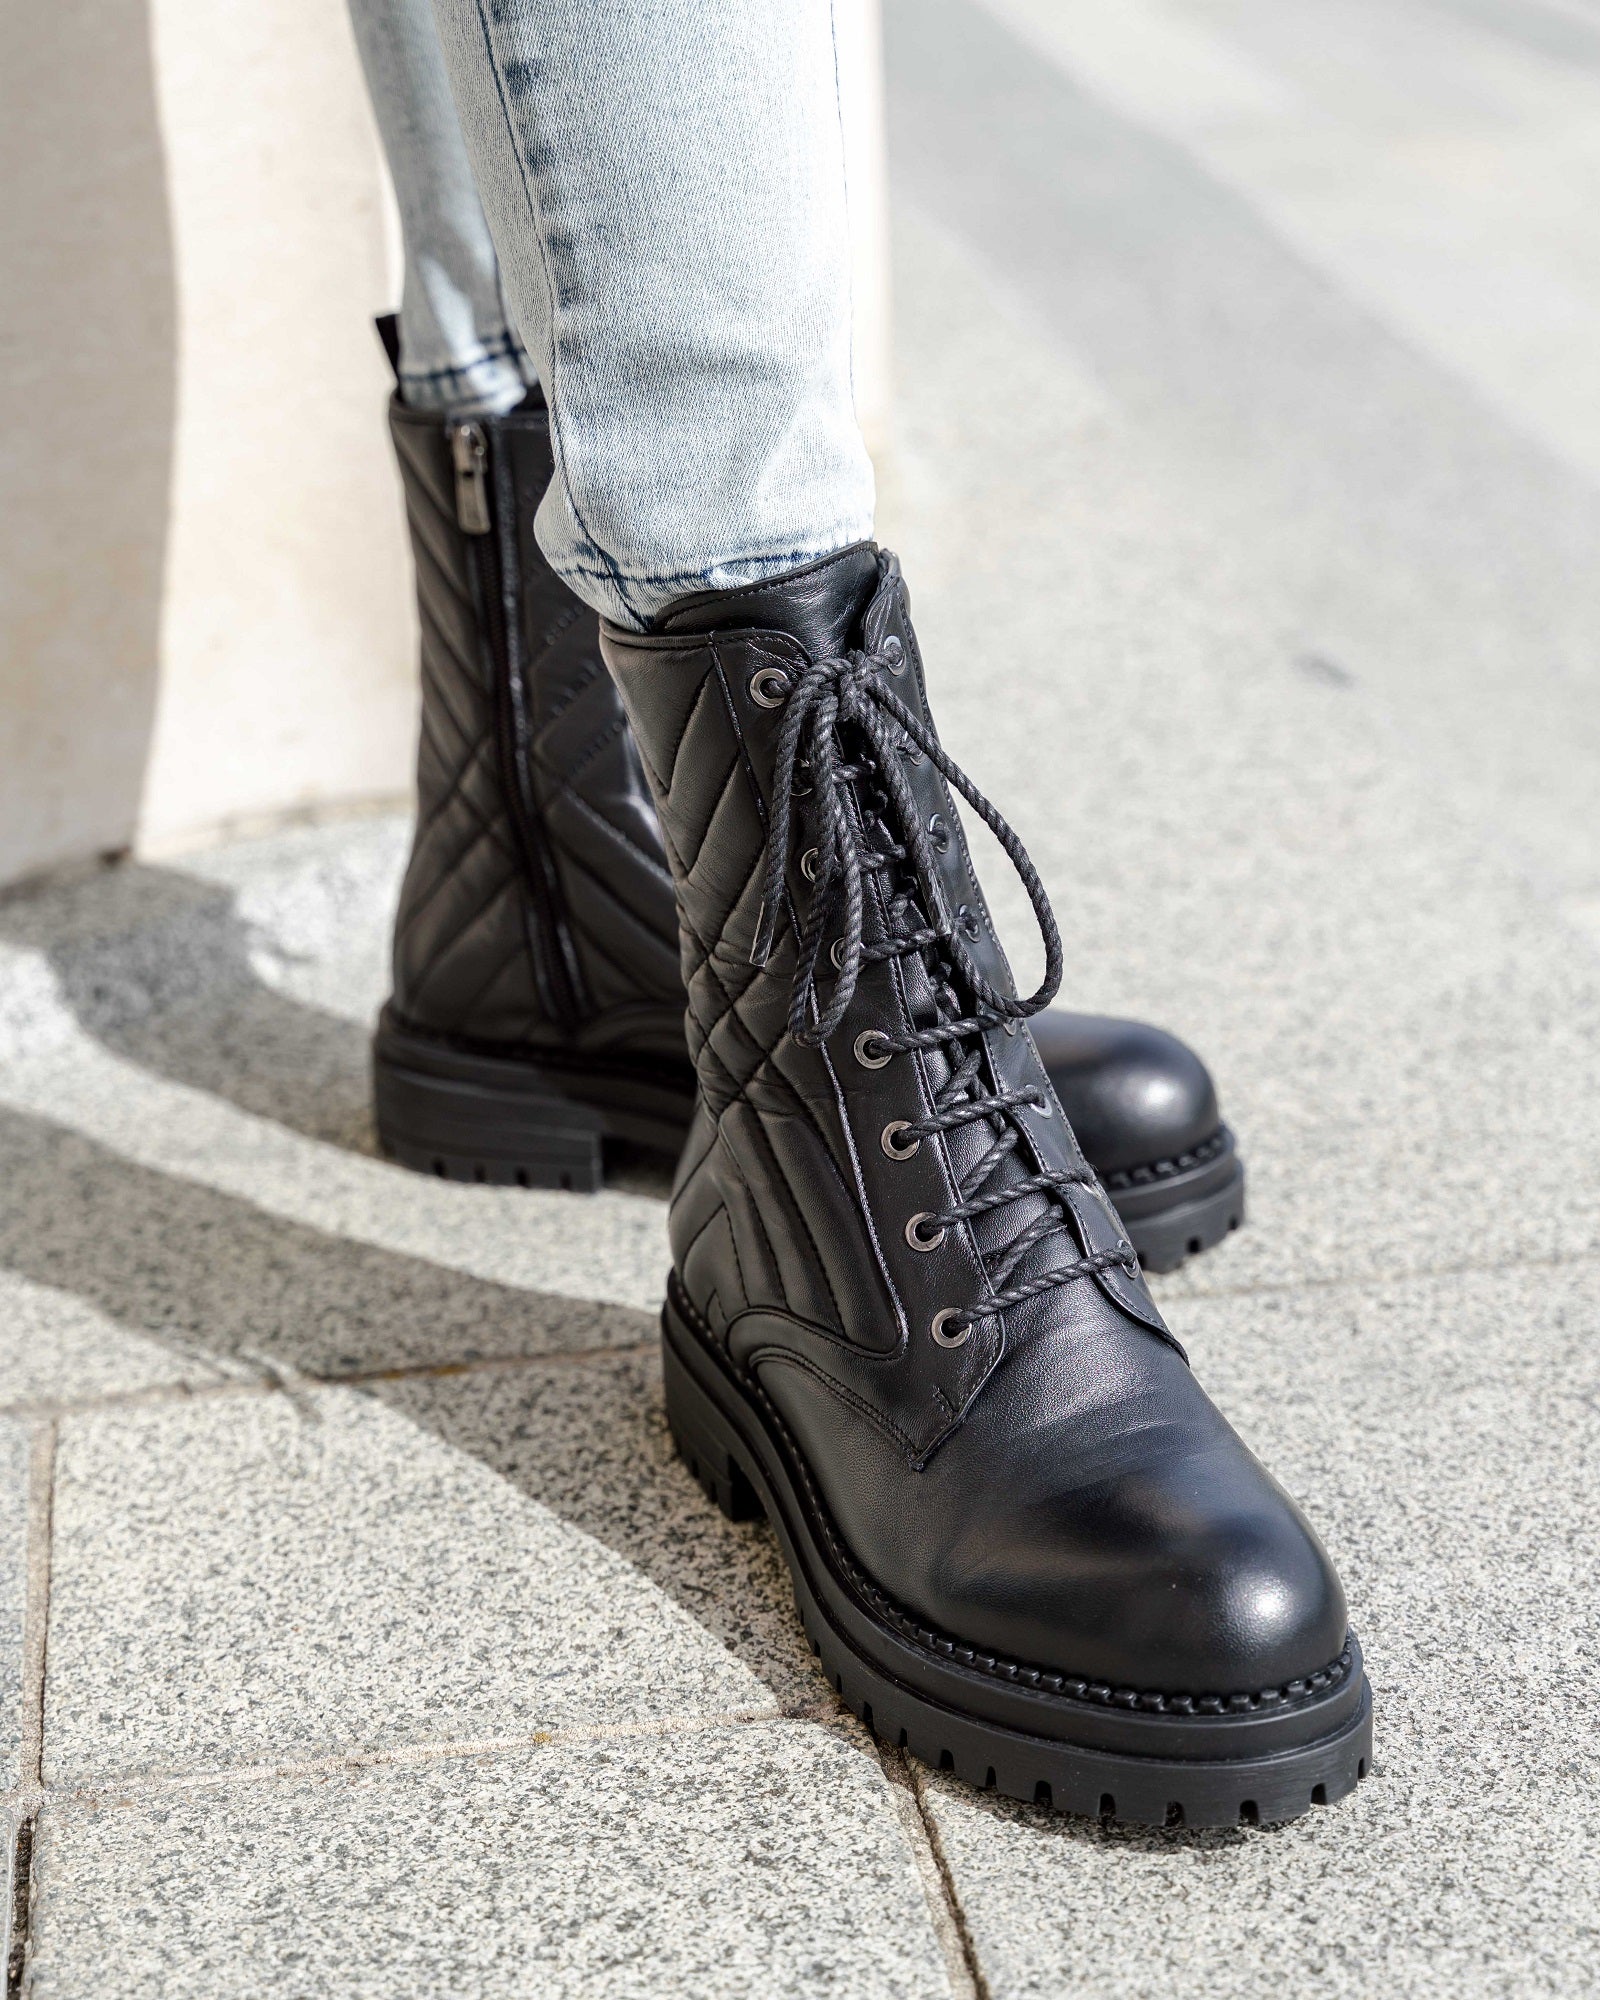 Riley Combat Boot Black Boots by Sole Shoes NZ AB13-36